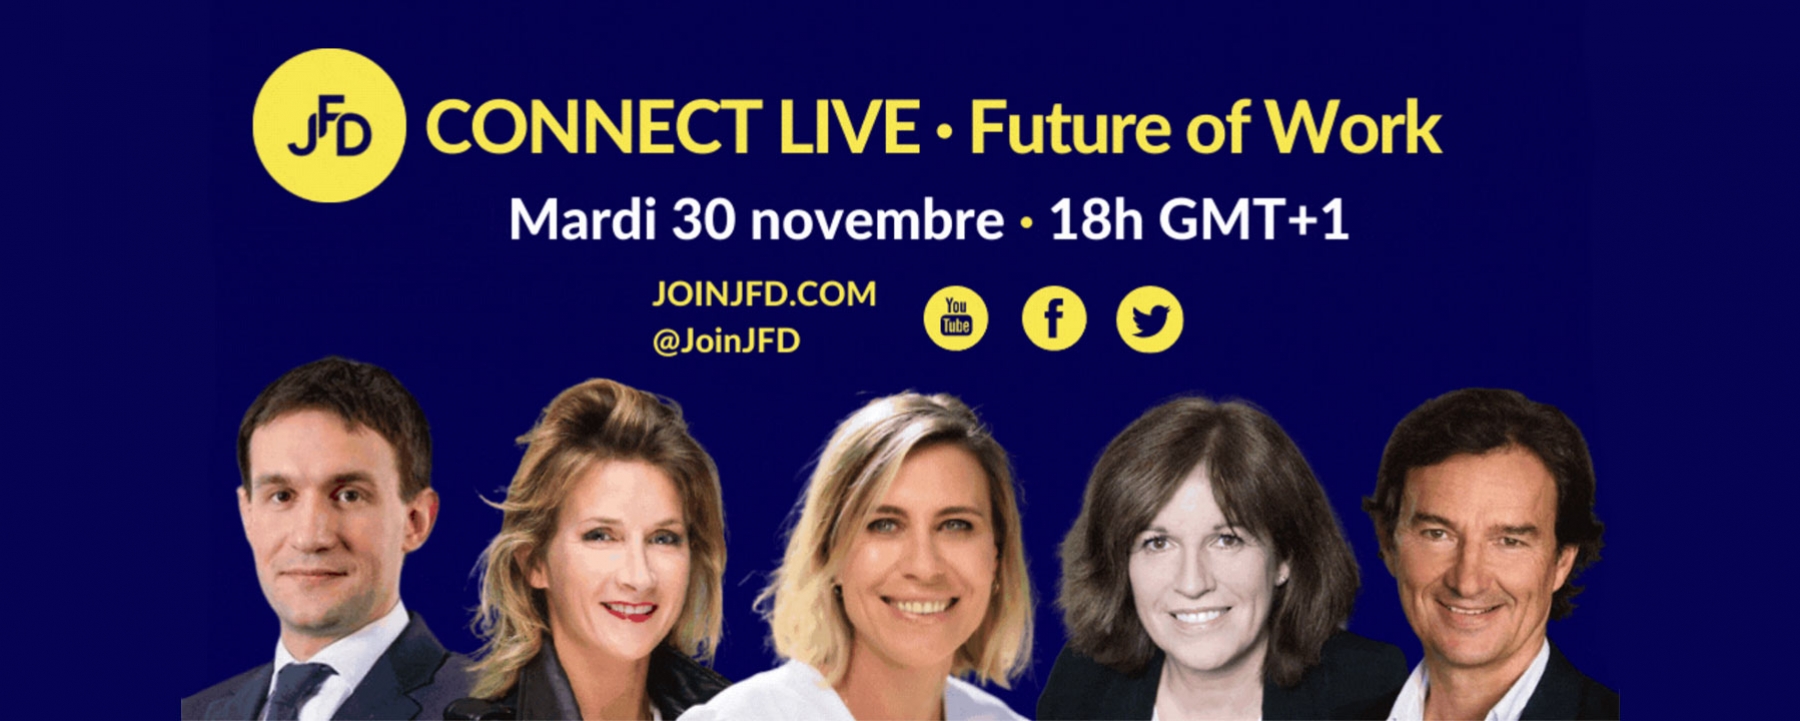 JFD Connect Live – Future of Work